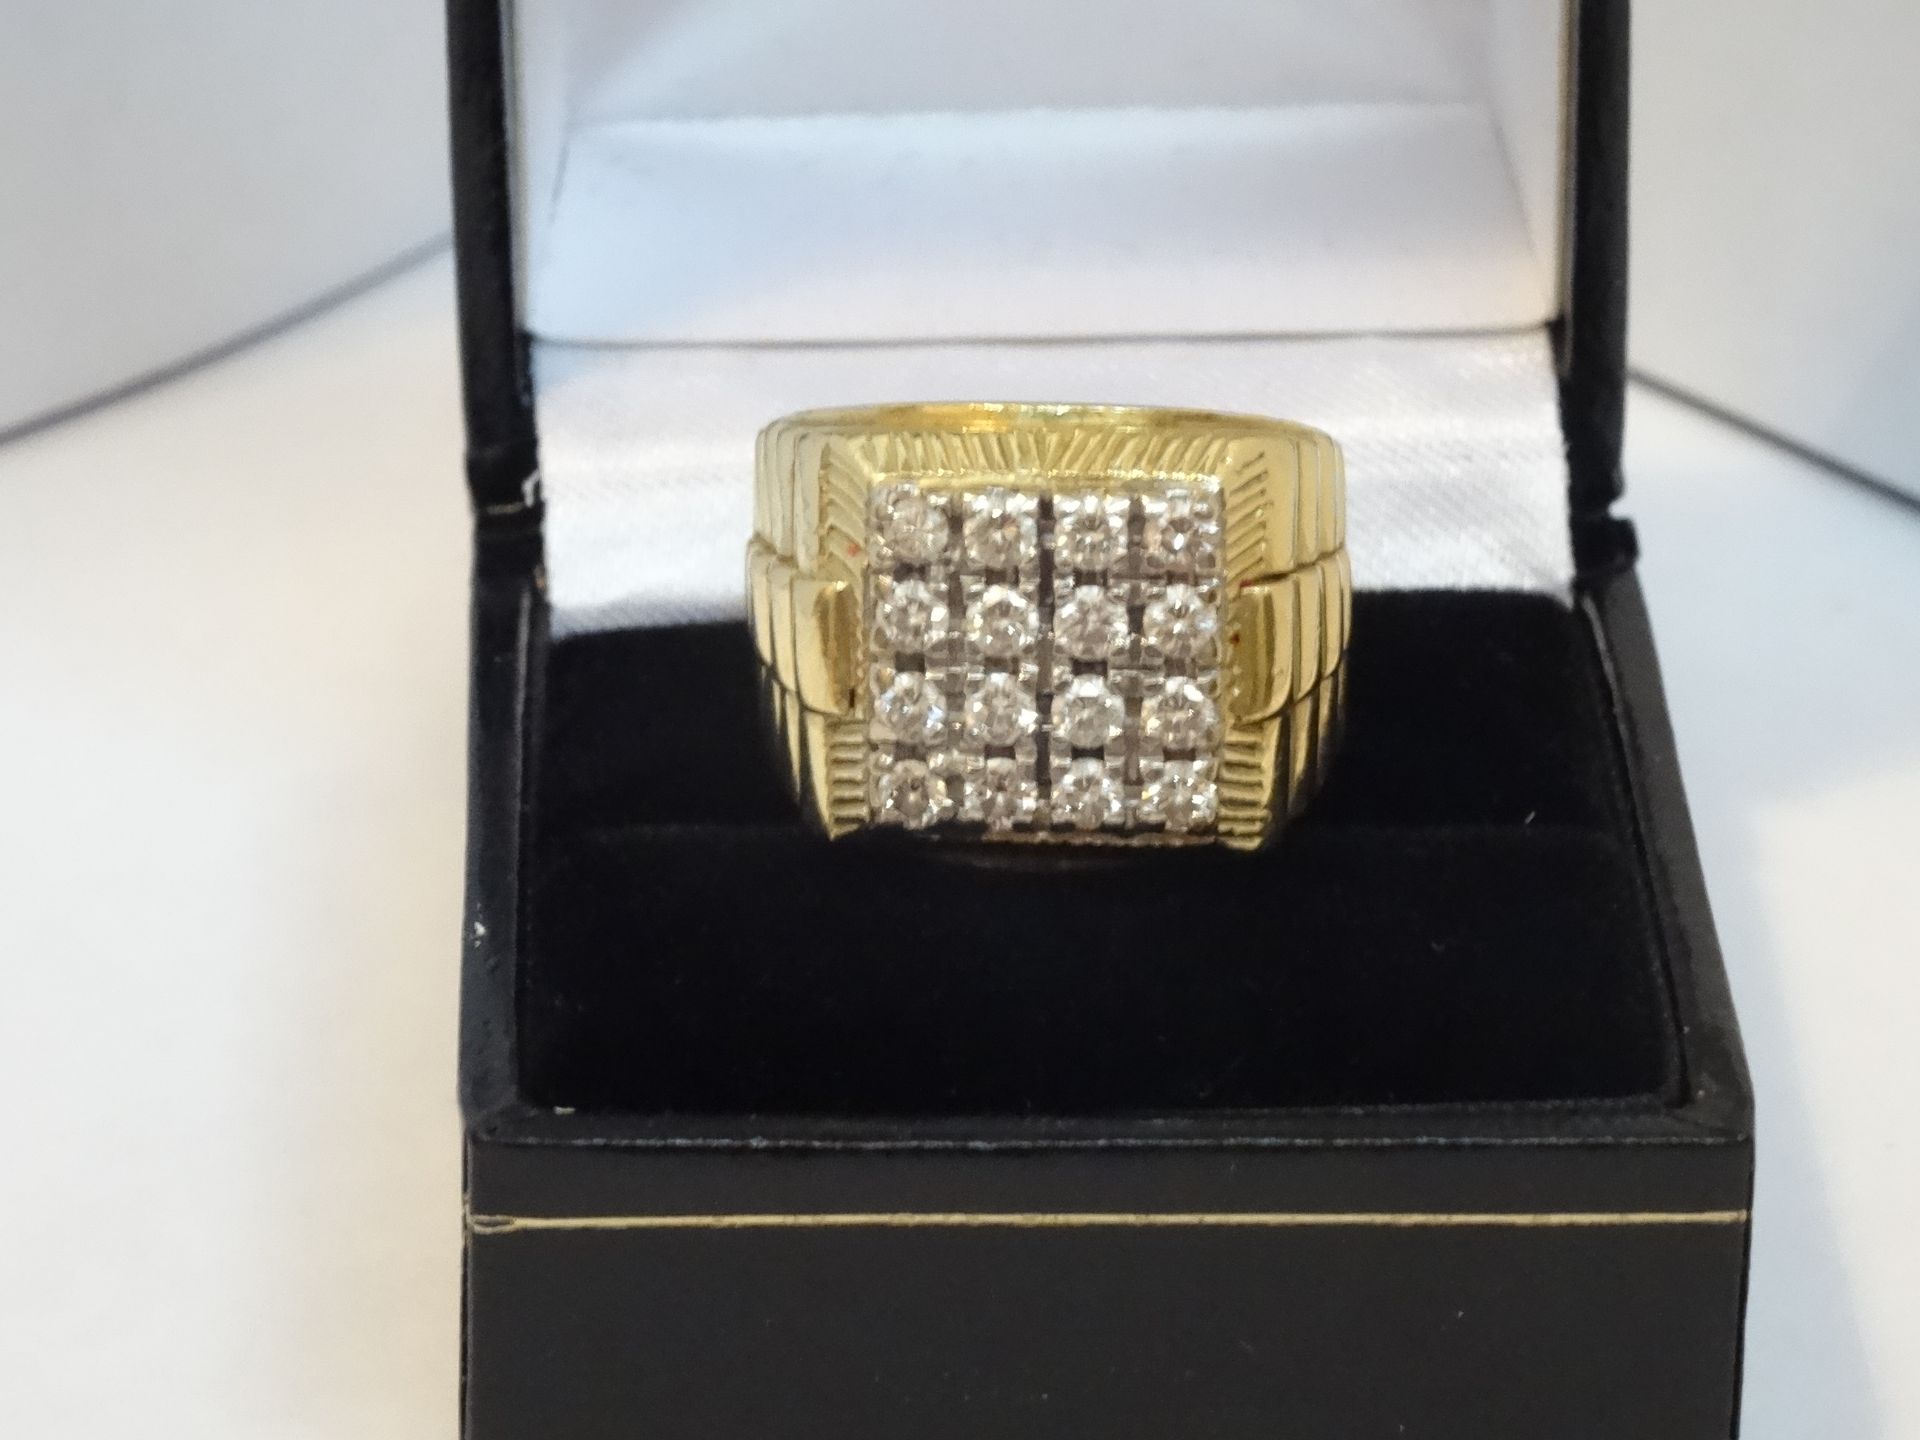 18 Carat Yellow & White Gold Gents Rolex Style Ring Containing 0.8 Carats Of Diamonds. - Image 4 of 6